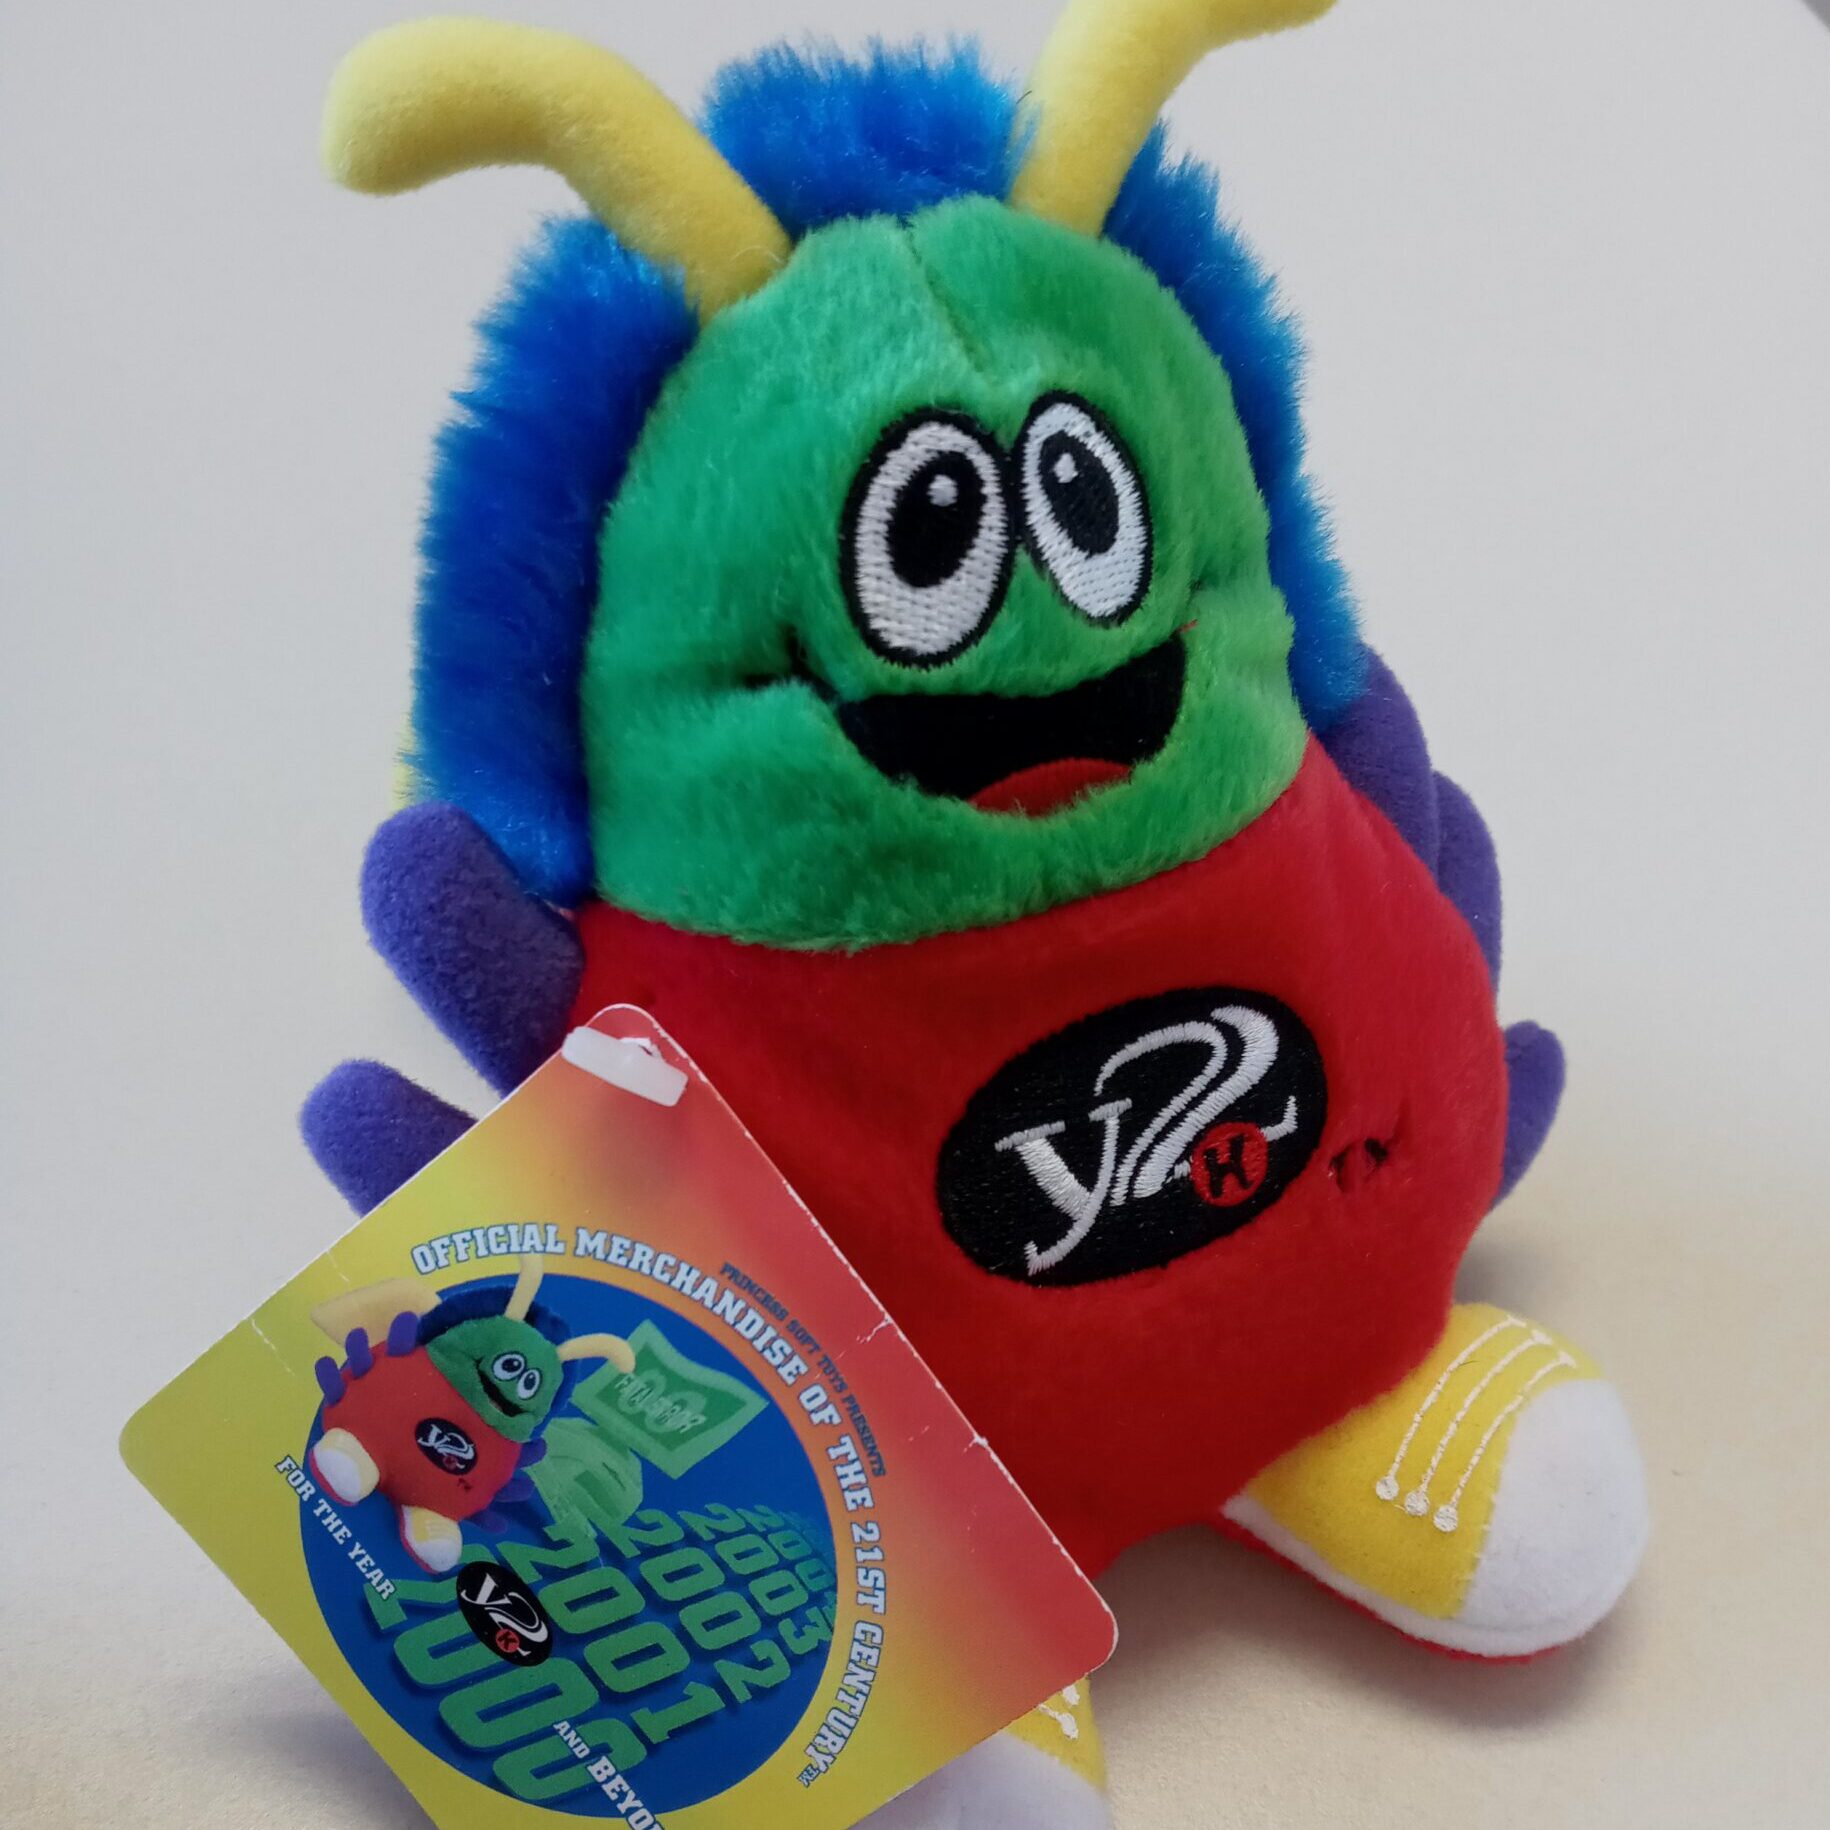 The Y2K "Bug": A colorful stuffed creature with antennae, fur, and goofy face. It says "Y2K" on the front.